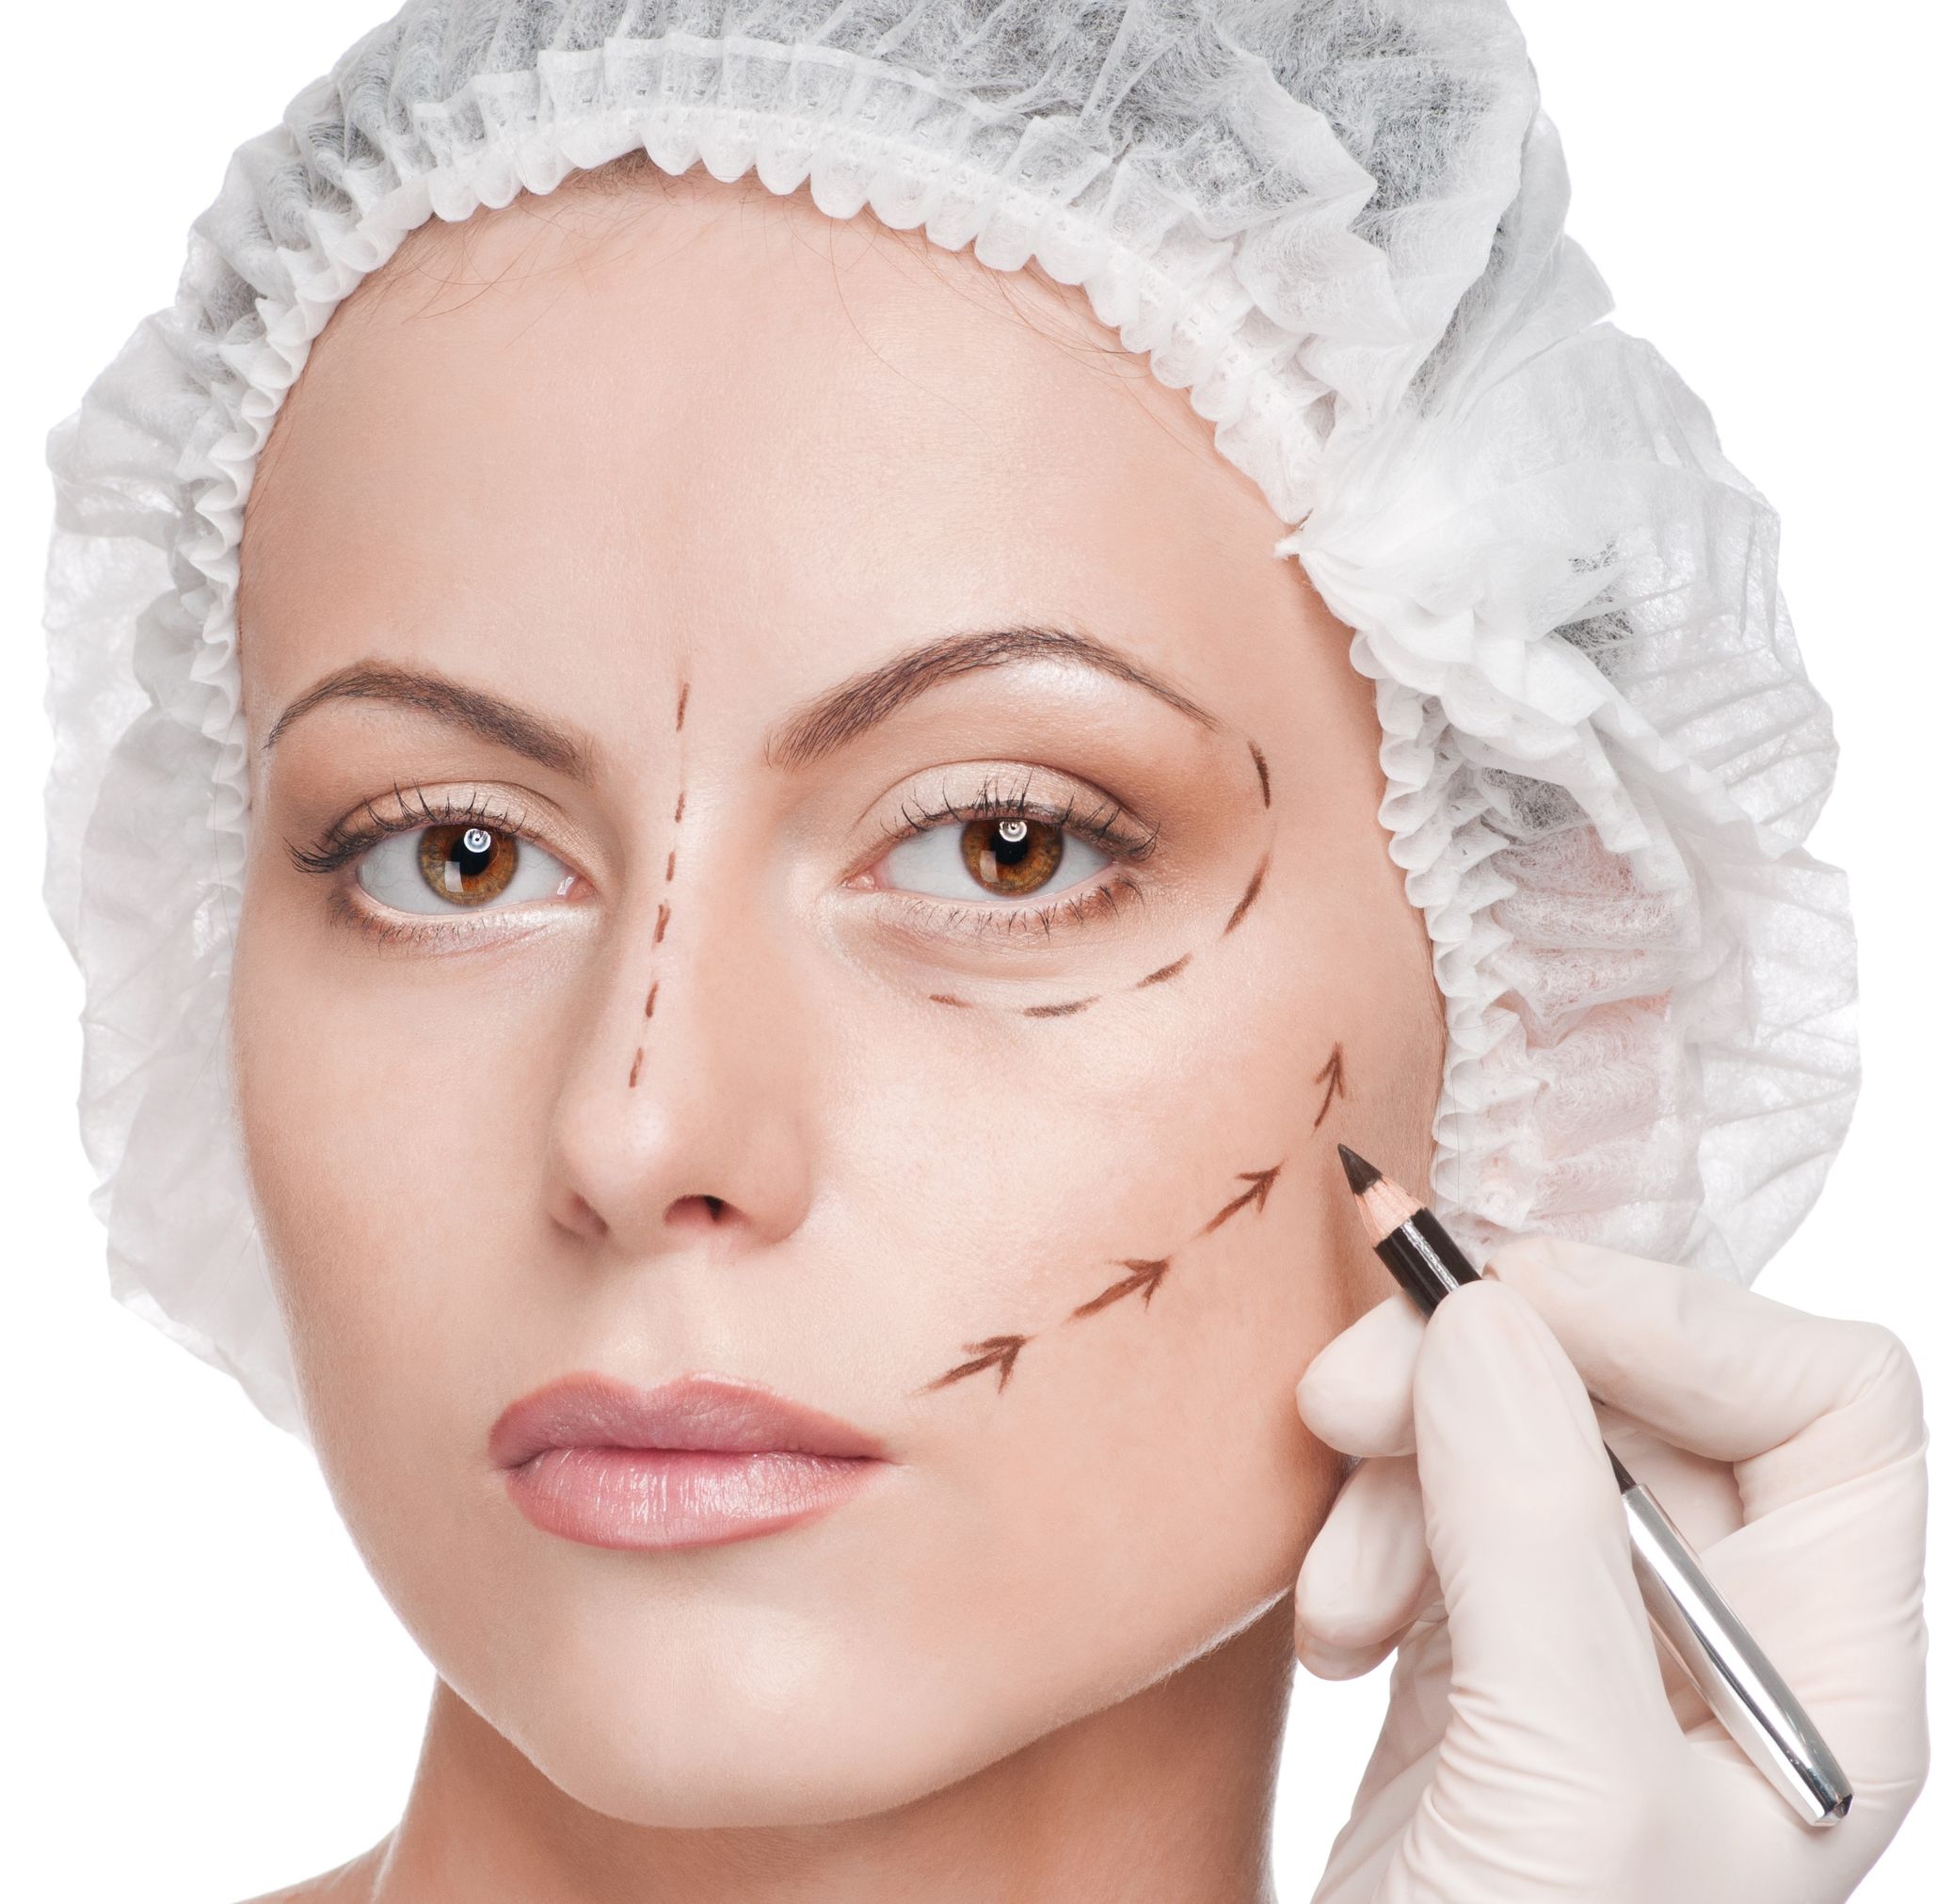 Get a Facelift from a Reputable Cosmetic Surgeon